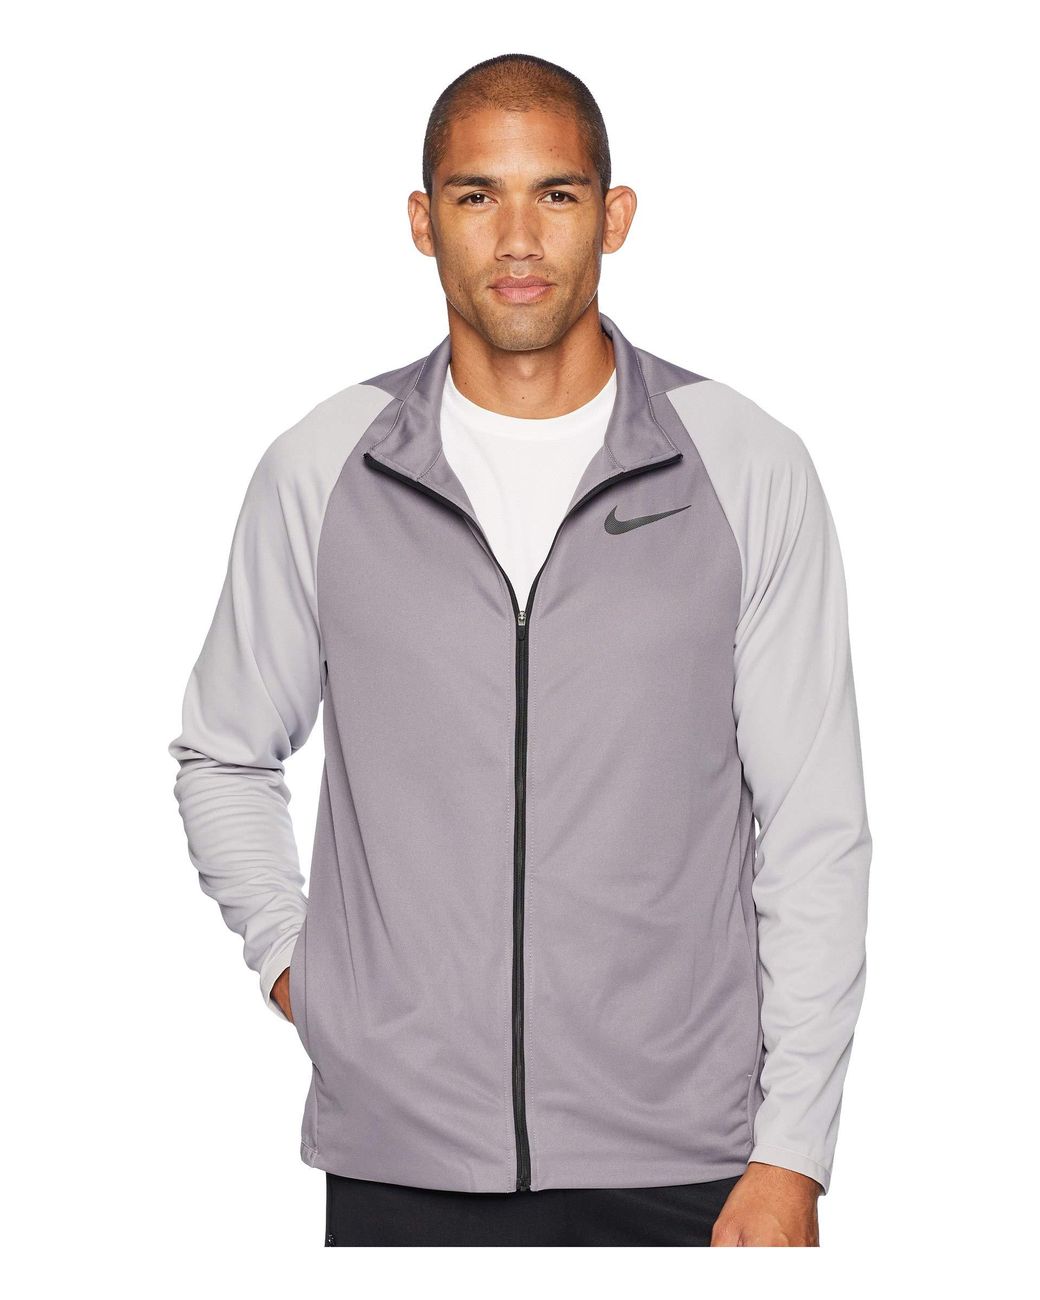 Nike Synthetic Epic Jacket Knit in Gray for Men - Save 9% - Lyst